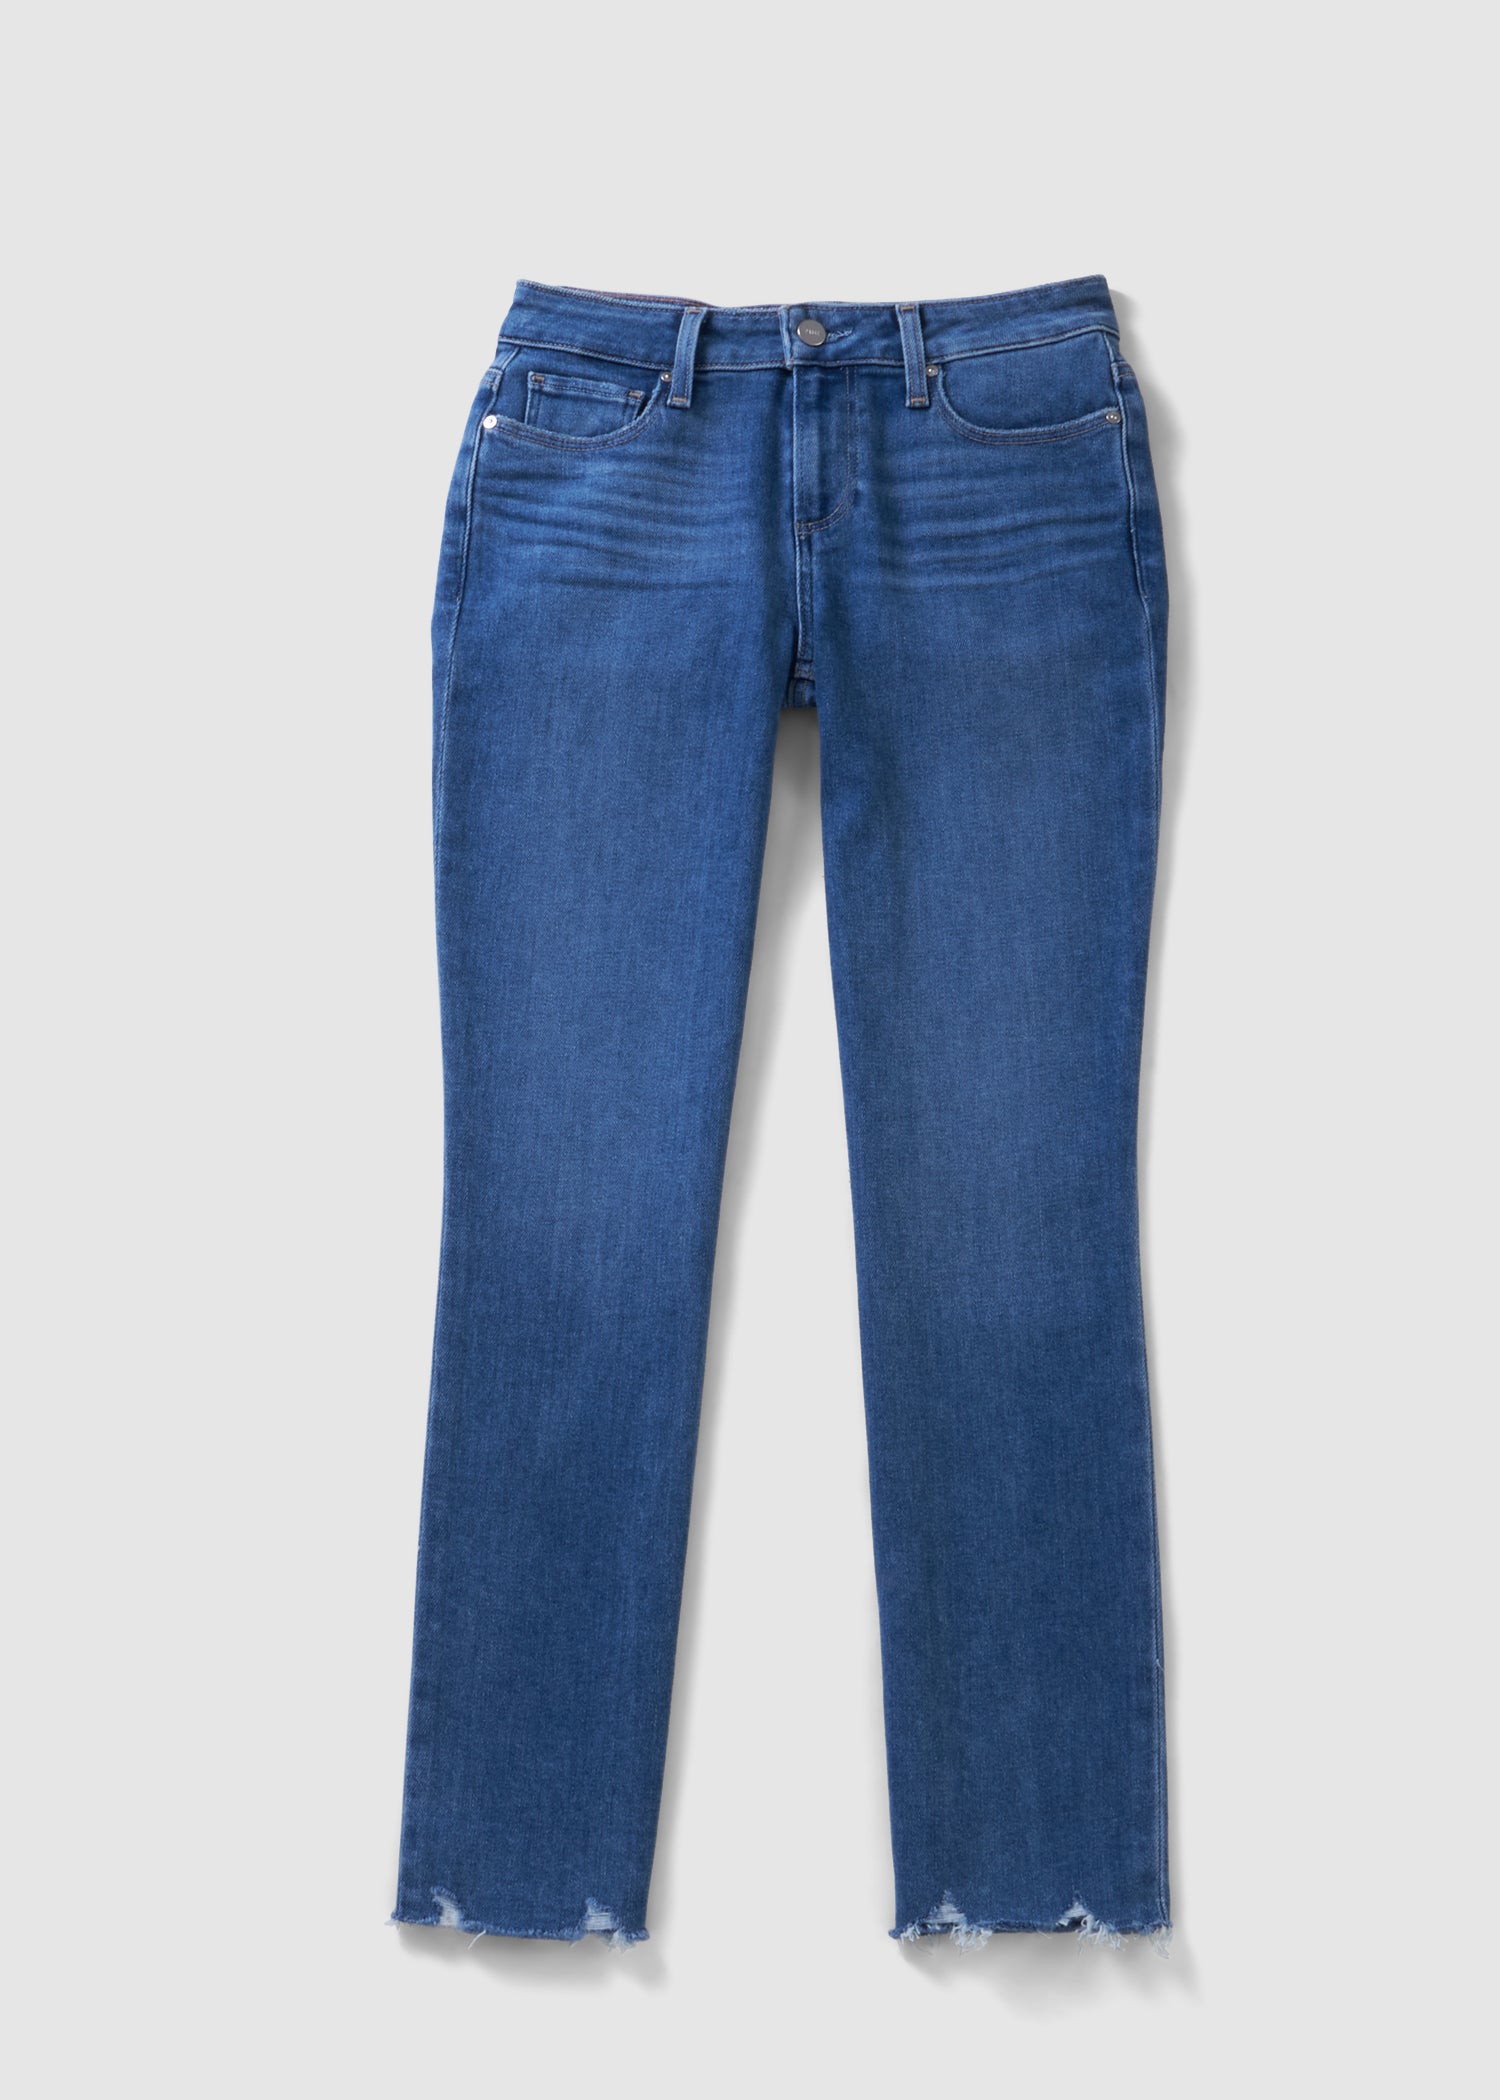 Image of Paige Womens Amber Straight Leg Jeans With Distressed Hem In Camelia With Tuned Hem